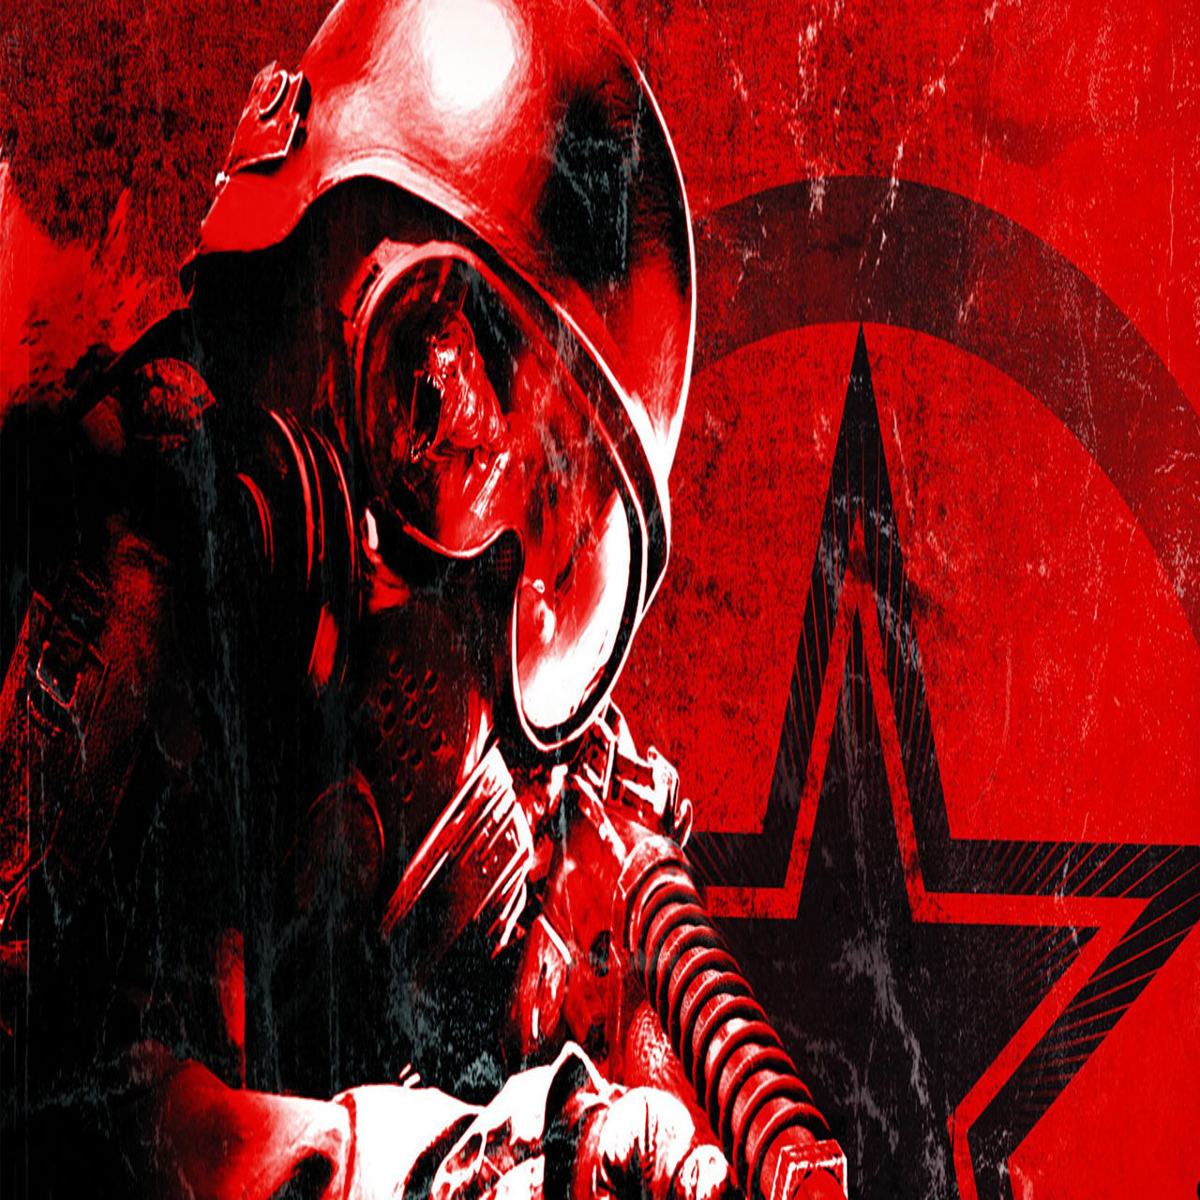 Production on the Metro 2033 film has halted because it didn't work with an  Americanised script